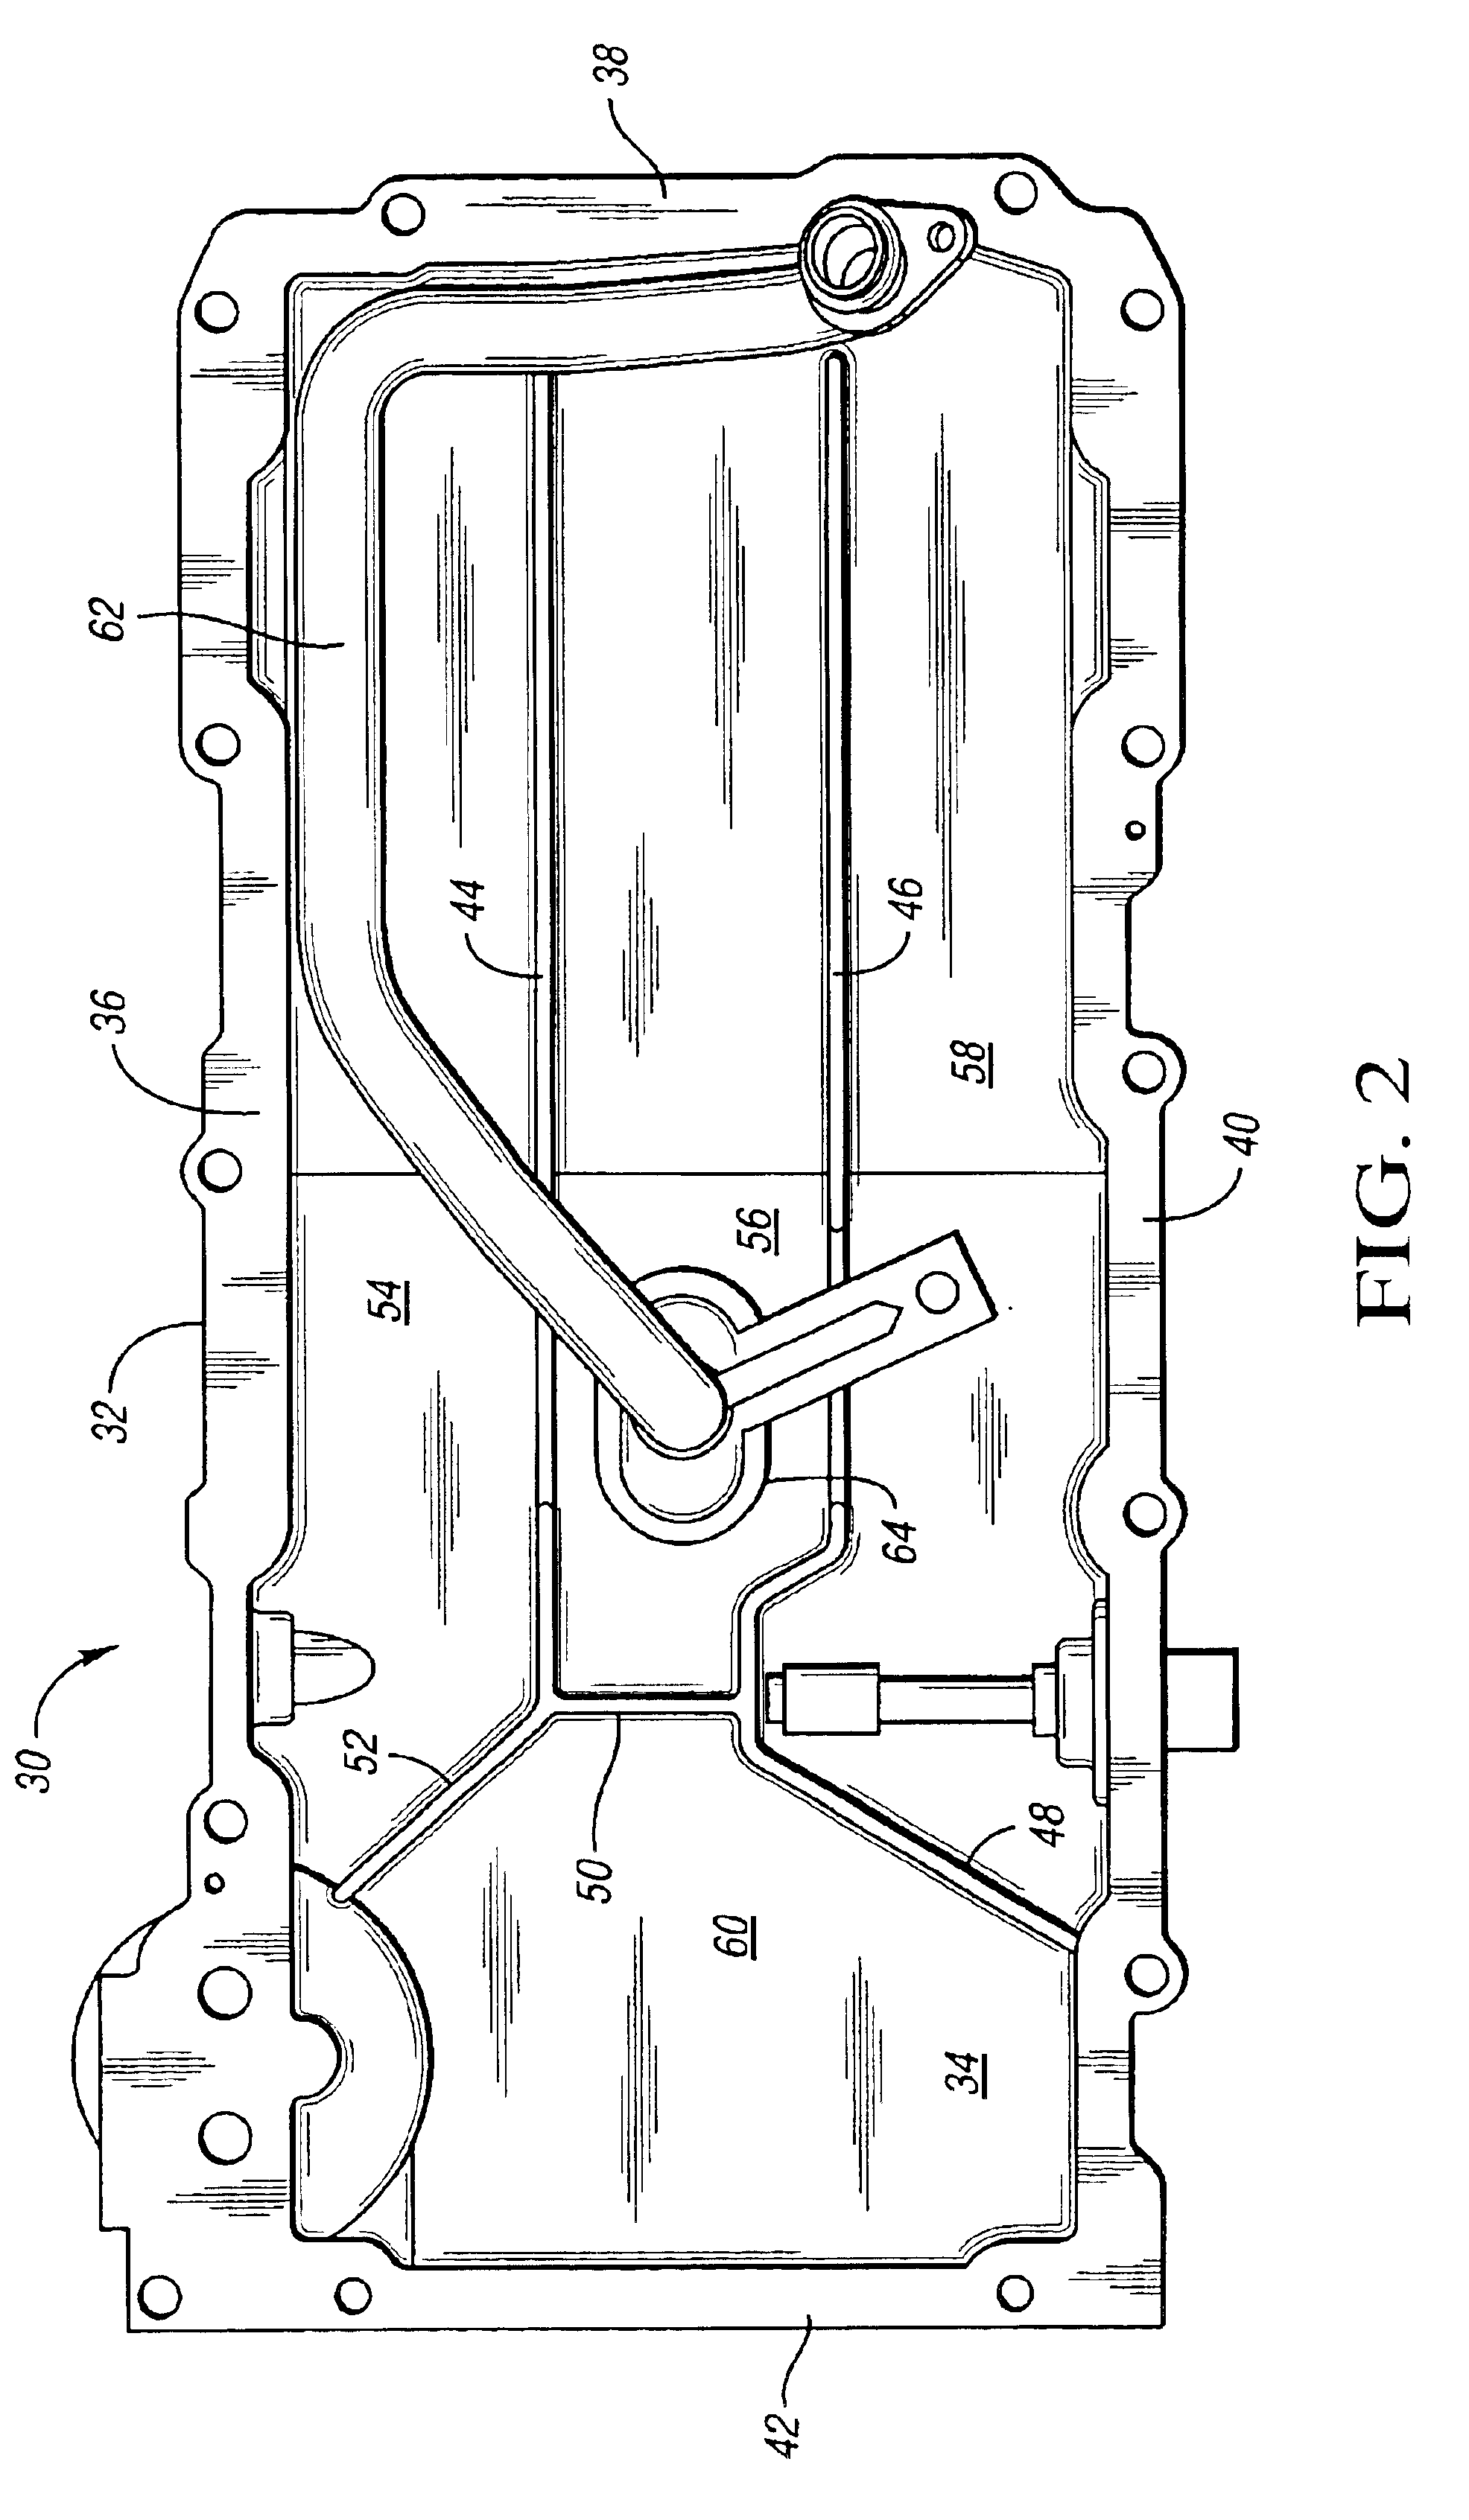 Oil pan with vertical baffles for oil flow control